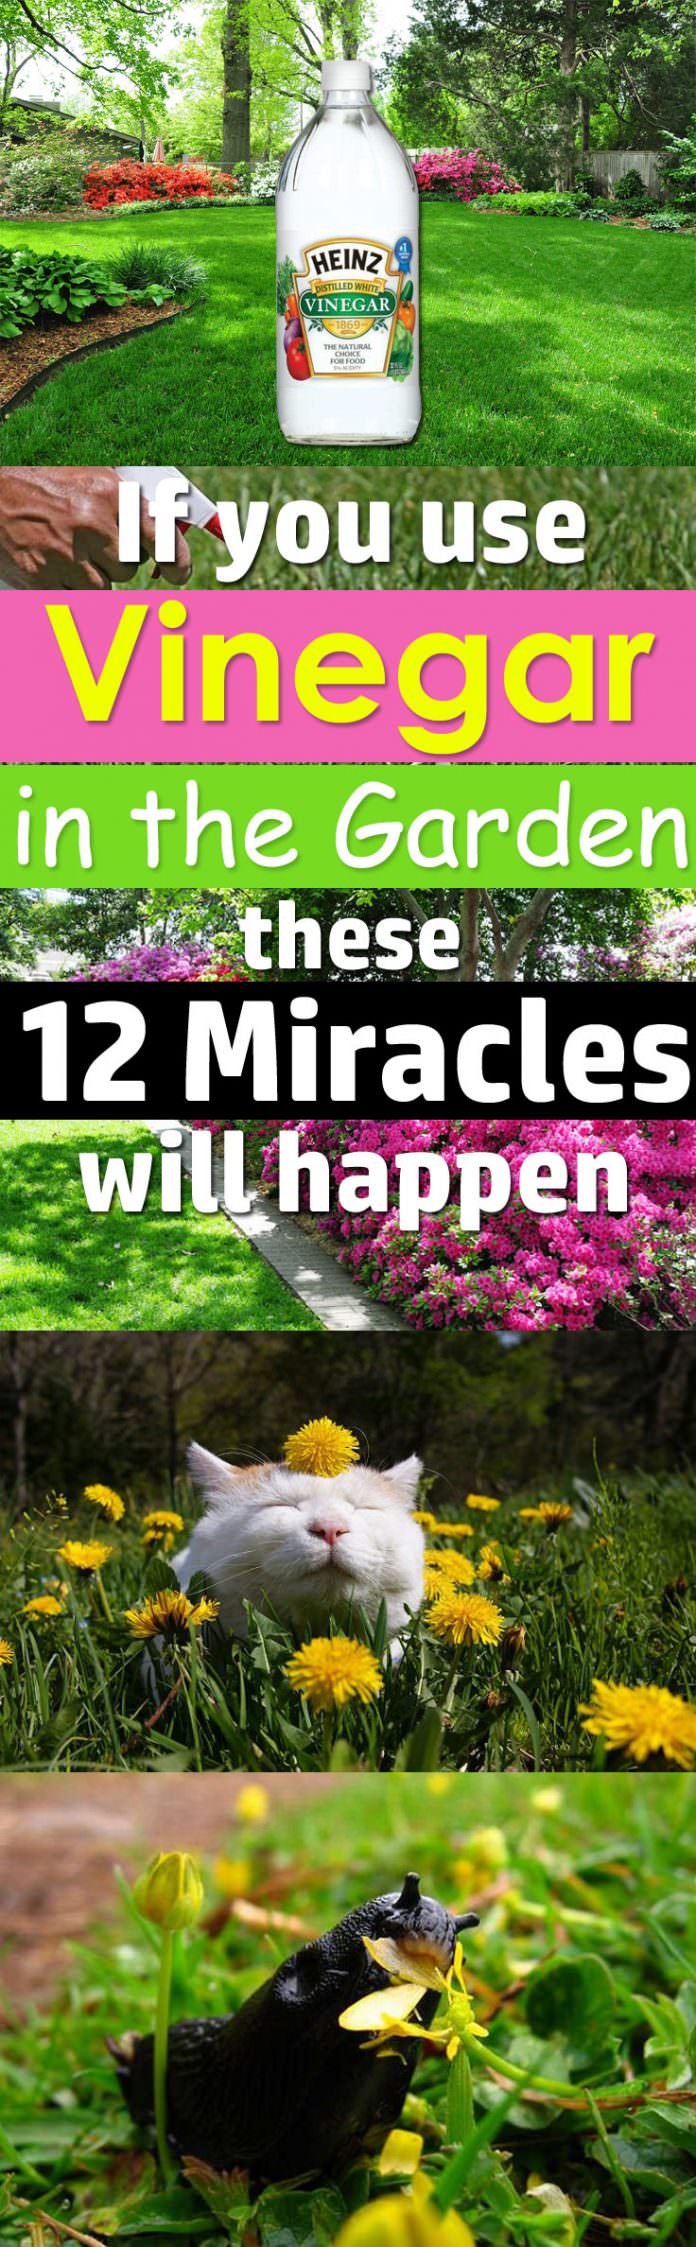 Vinegar can do magic in your garden if you use it for these 12 things. Read on!